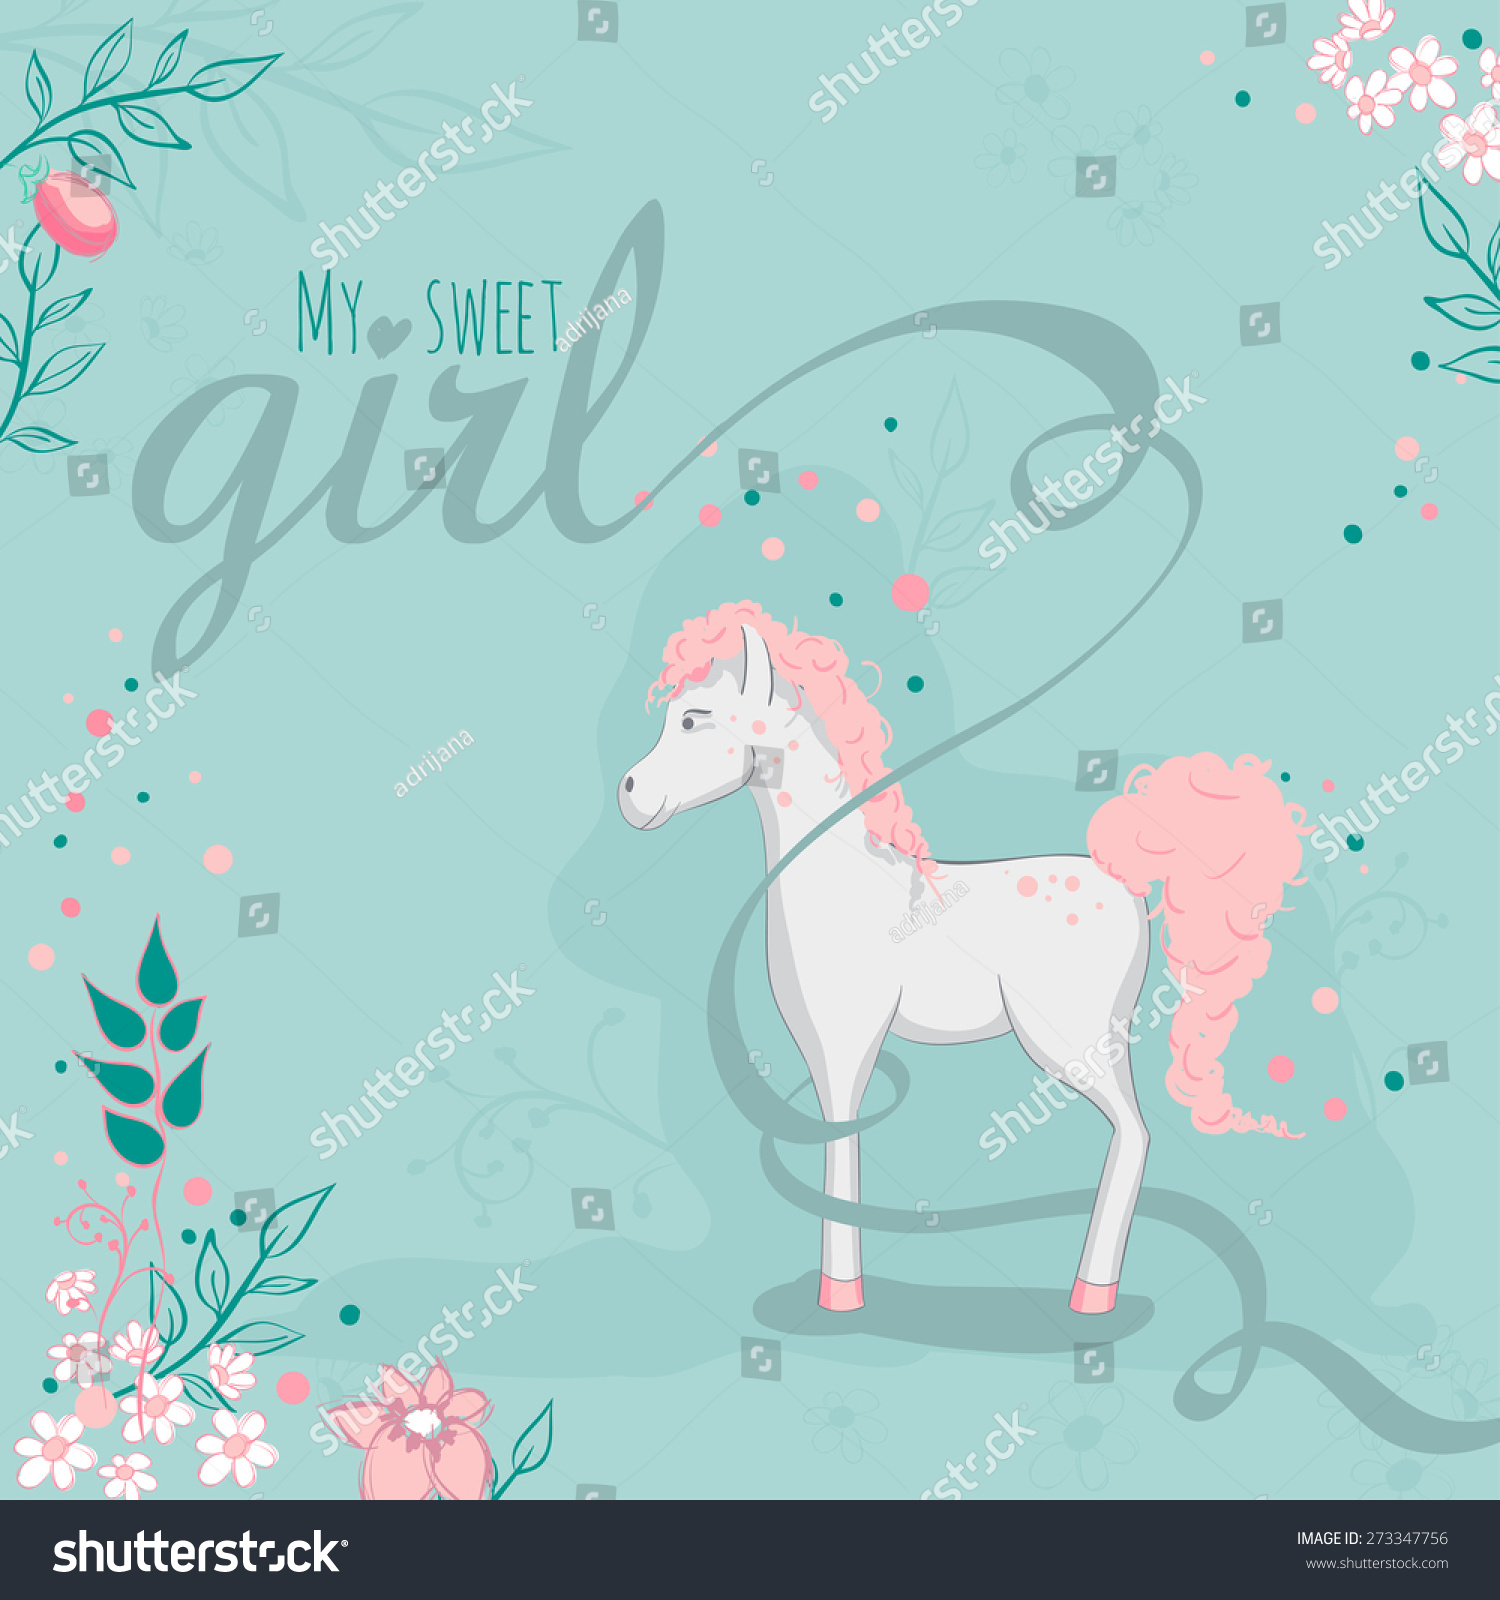 SVG of Greeting card - White horse and flowers - My sweet girl. Text is on a separate layer. svg